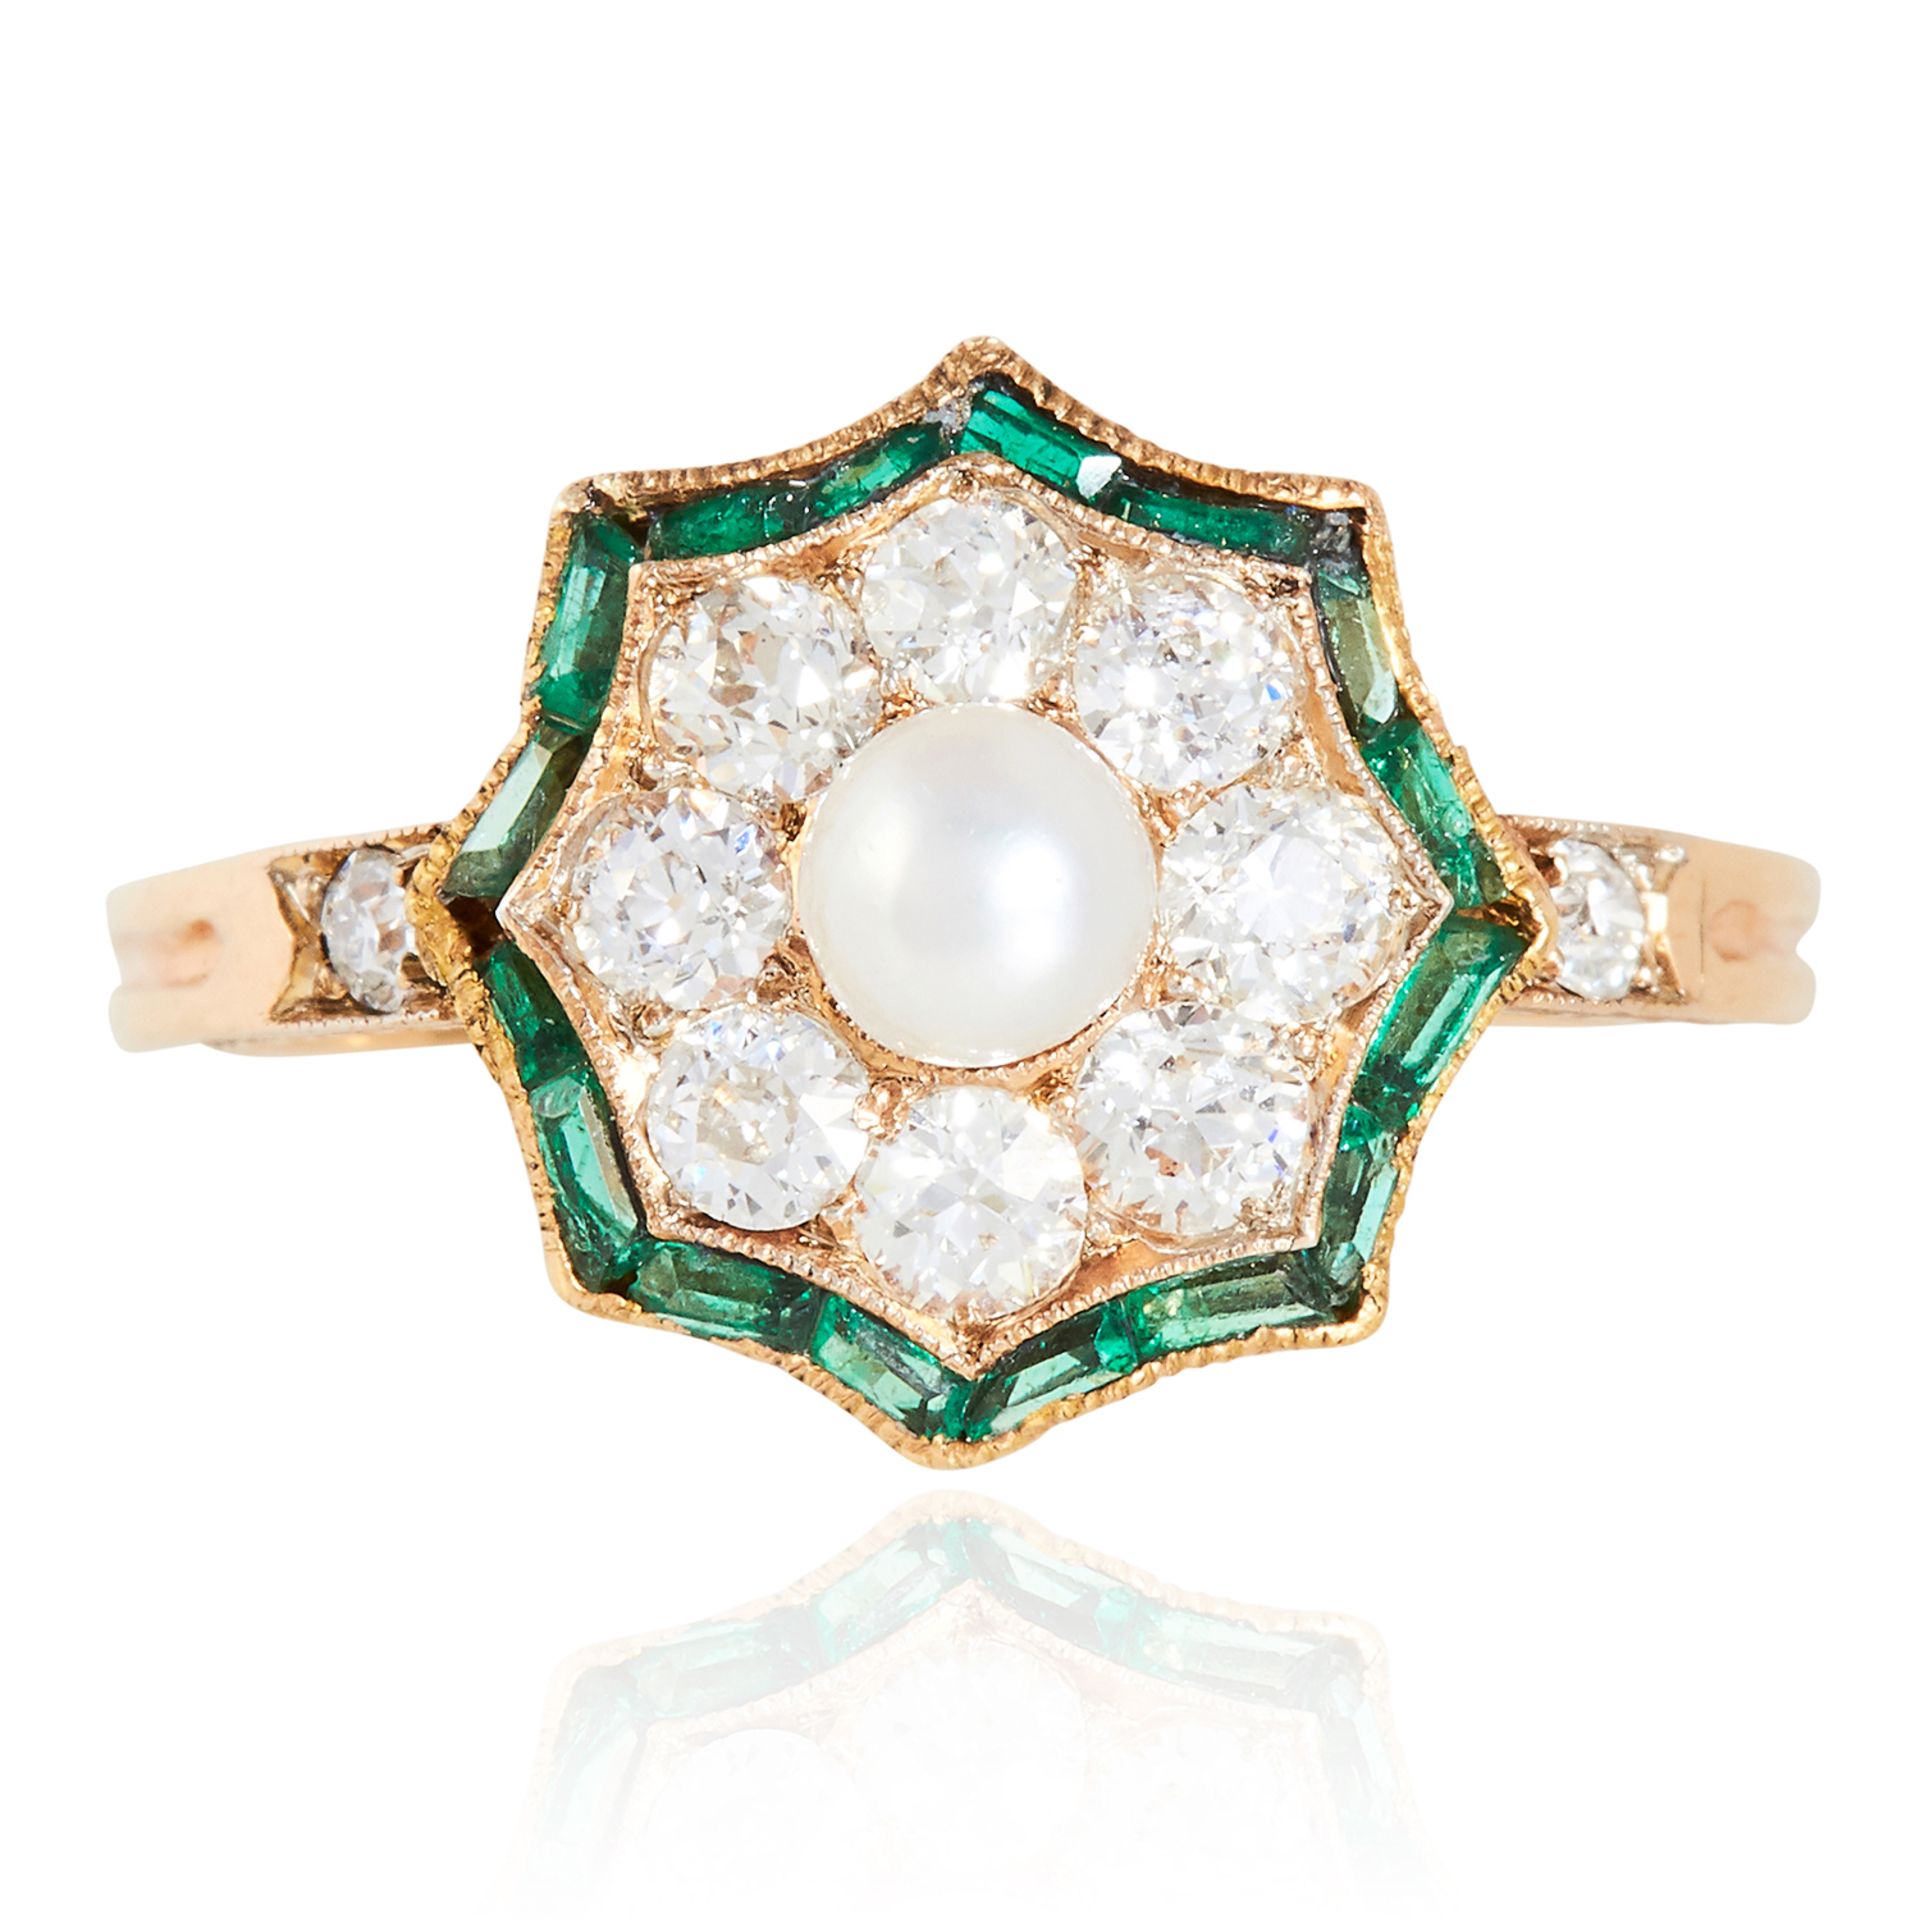 AN ART DECO PEARL, DIAMOND AND EMERALD RING in 18ct yellow gold, the central pearl encircled by